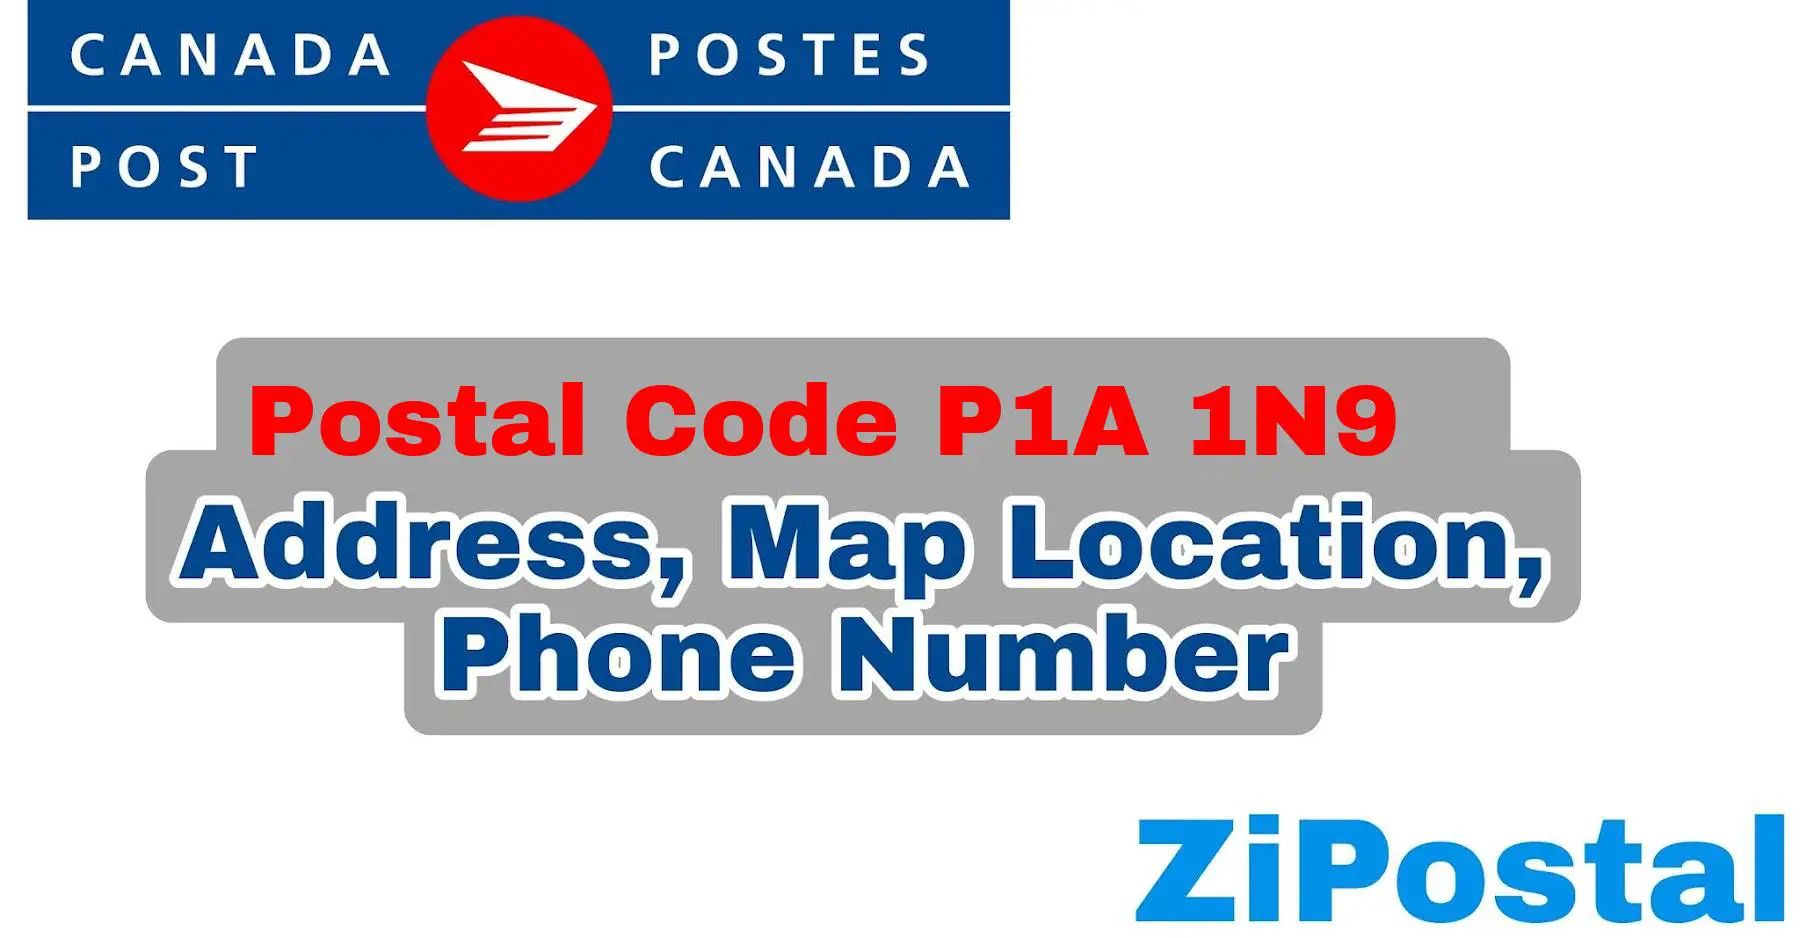 Postal Code P1A 1N9 Address Map Location and Phone Number